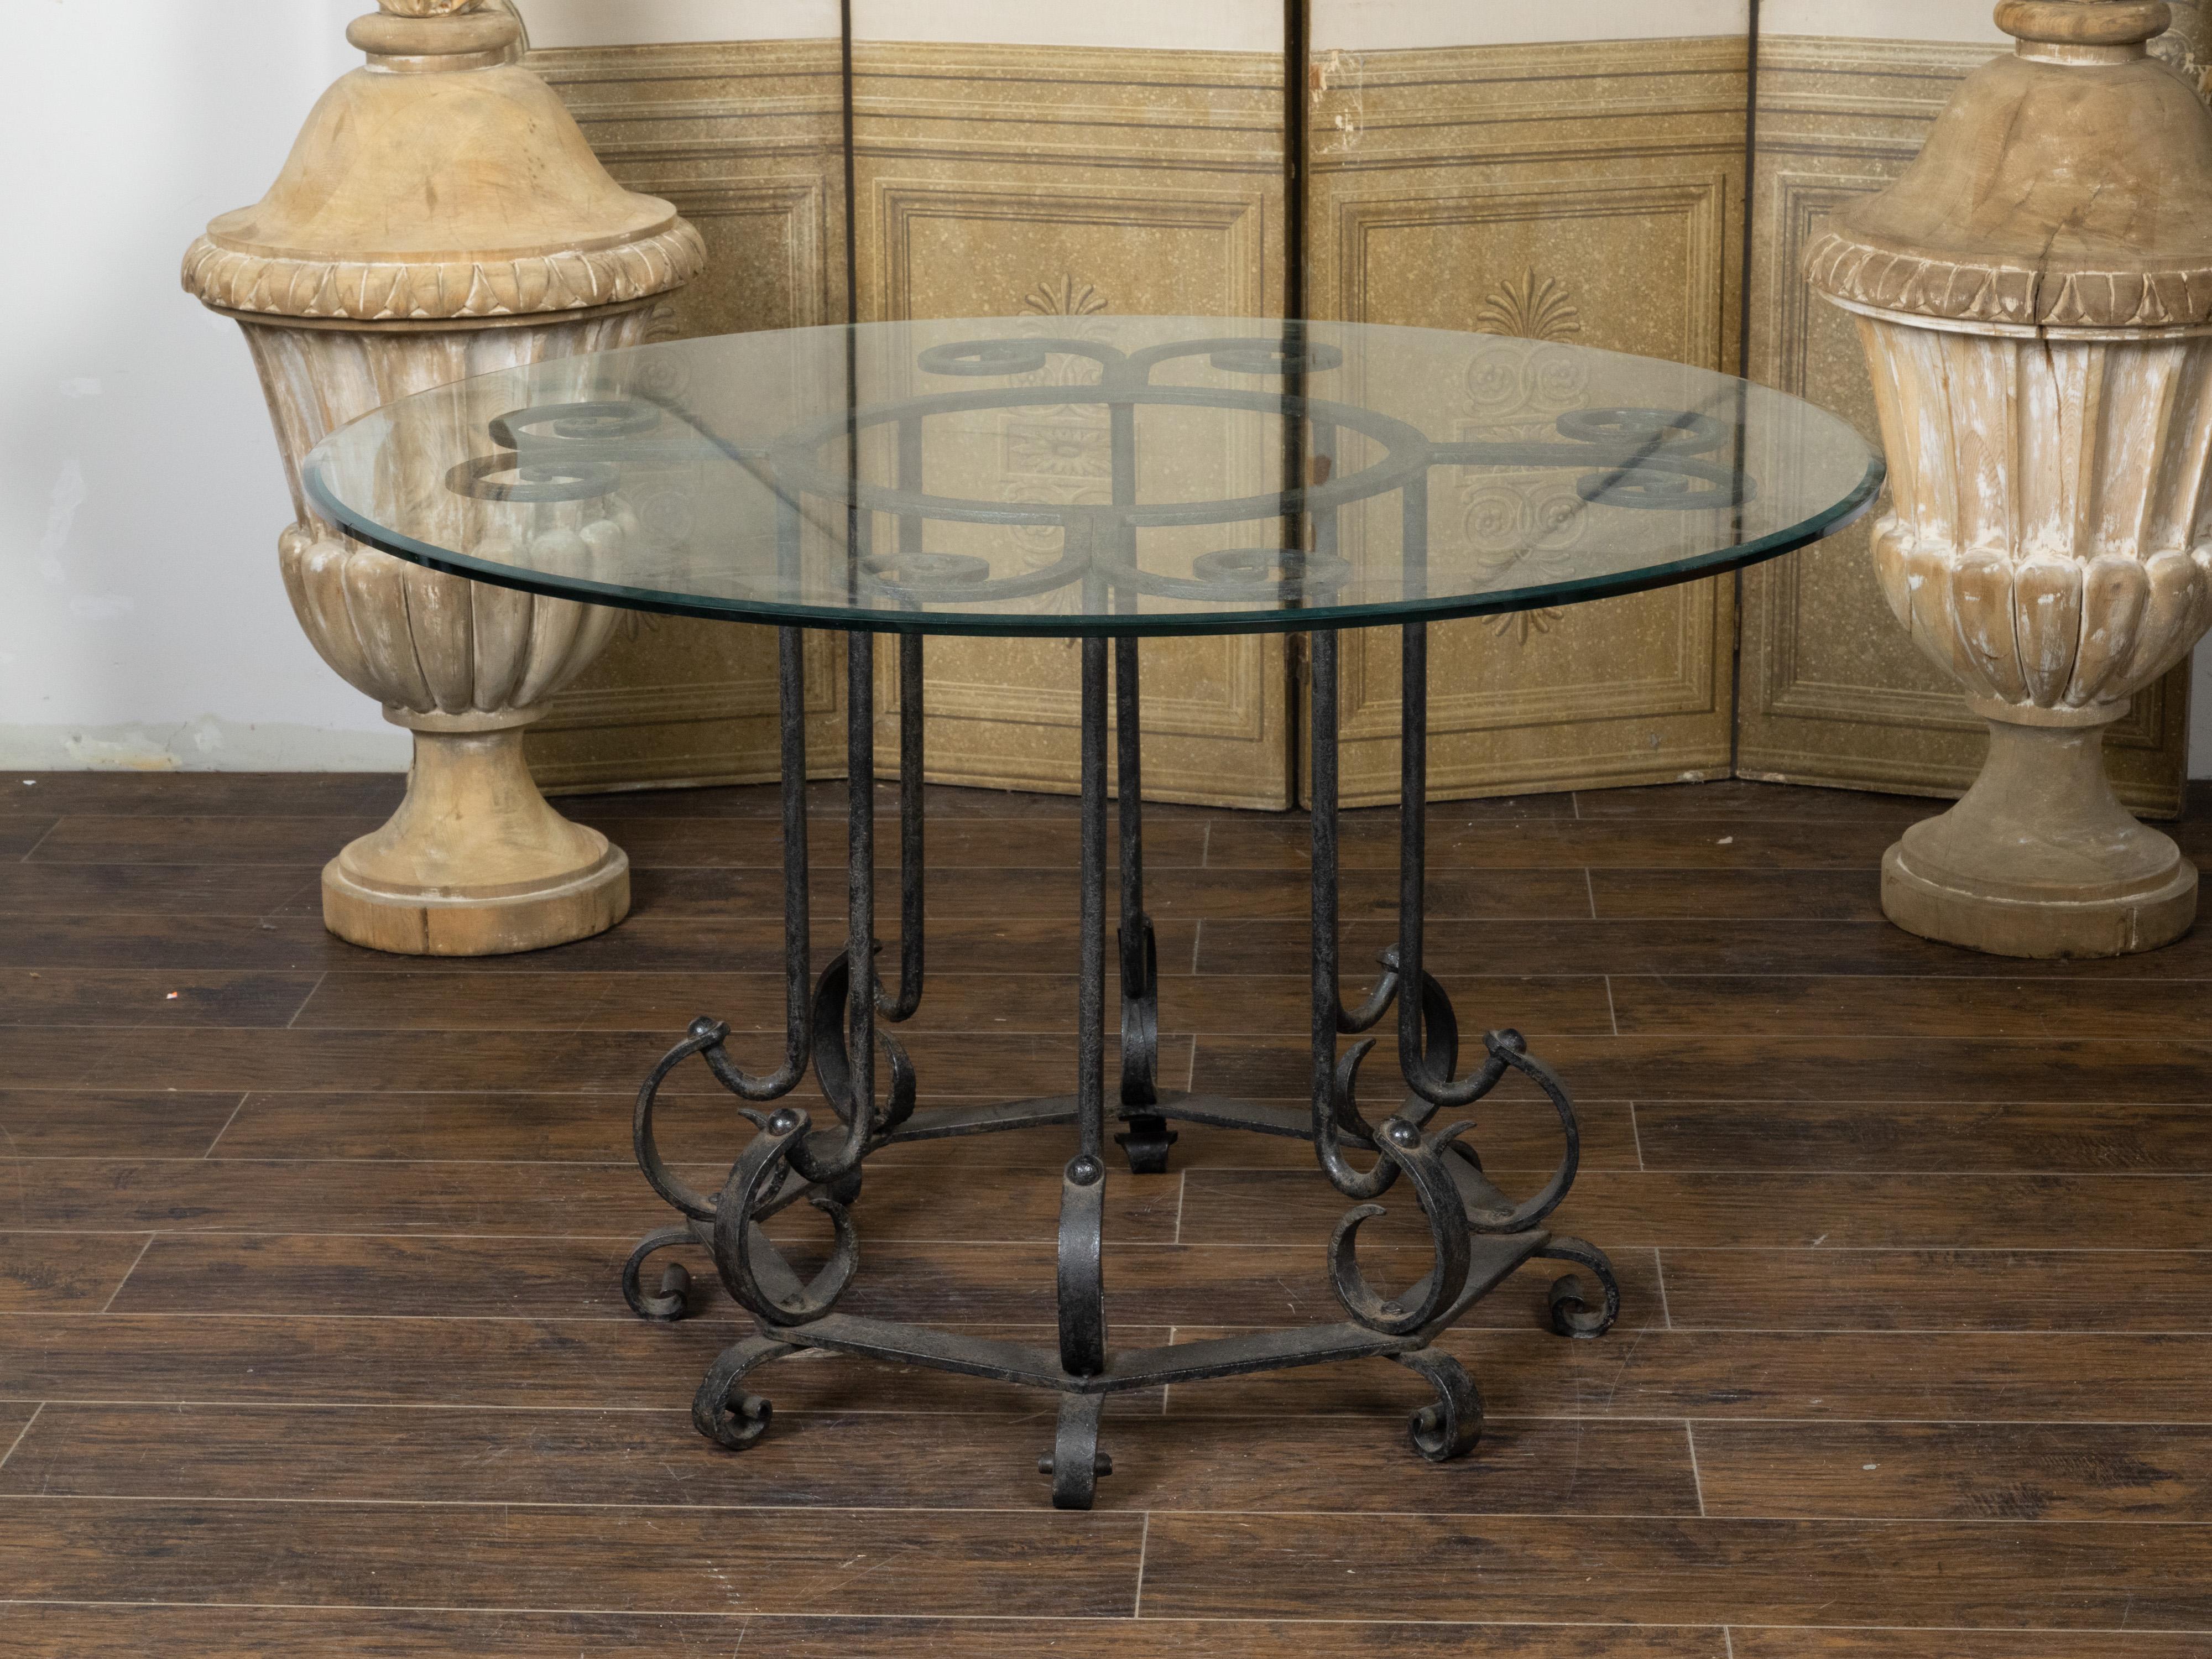 A vintage French iron center table from the mid 20th century with circular glass top, scrolling motifs and octagonal base. Created in France during the Midcentury period, this center table features a round glass top sitting above an elaborate iron